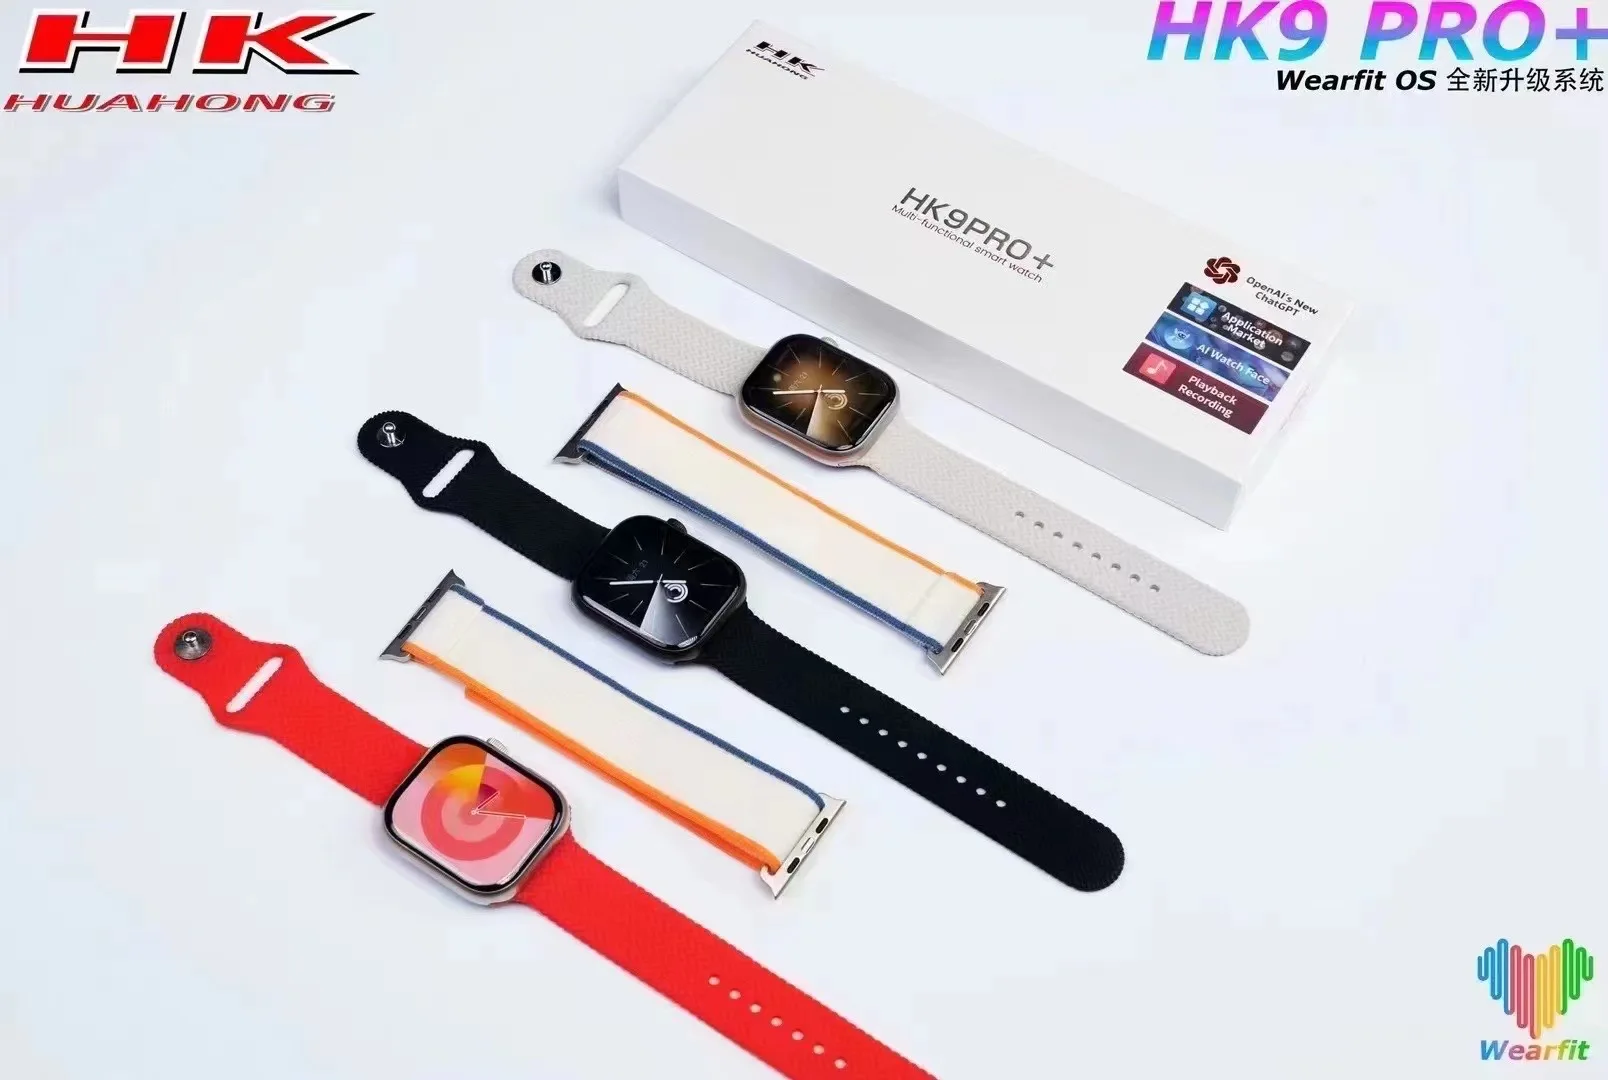 Order HK9 Ultra 2 AMOLED 90hz Display 2GB Storage WearOS.10 ChatGPT 2.0  With GIFTS Online From SmartWatch World,MUMBAI